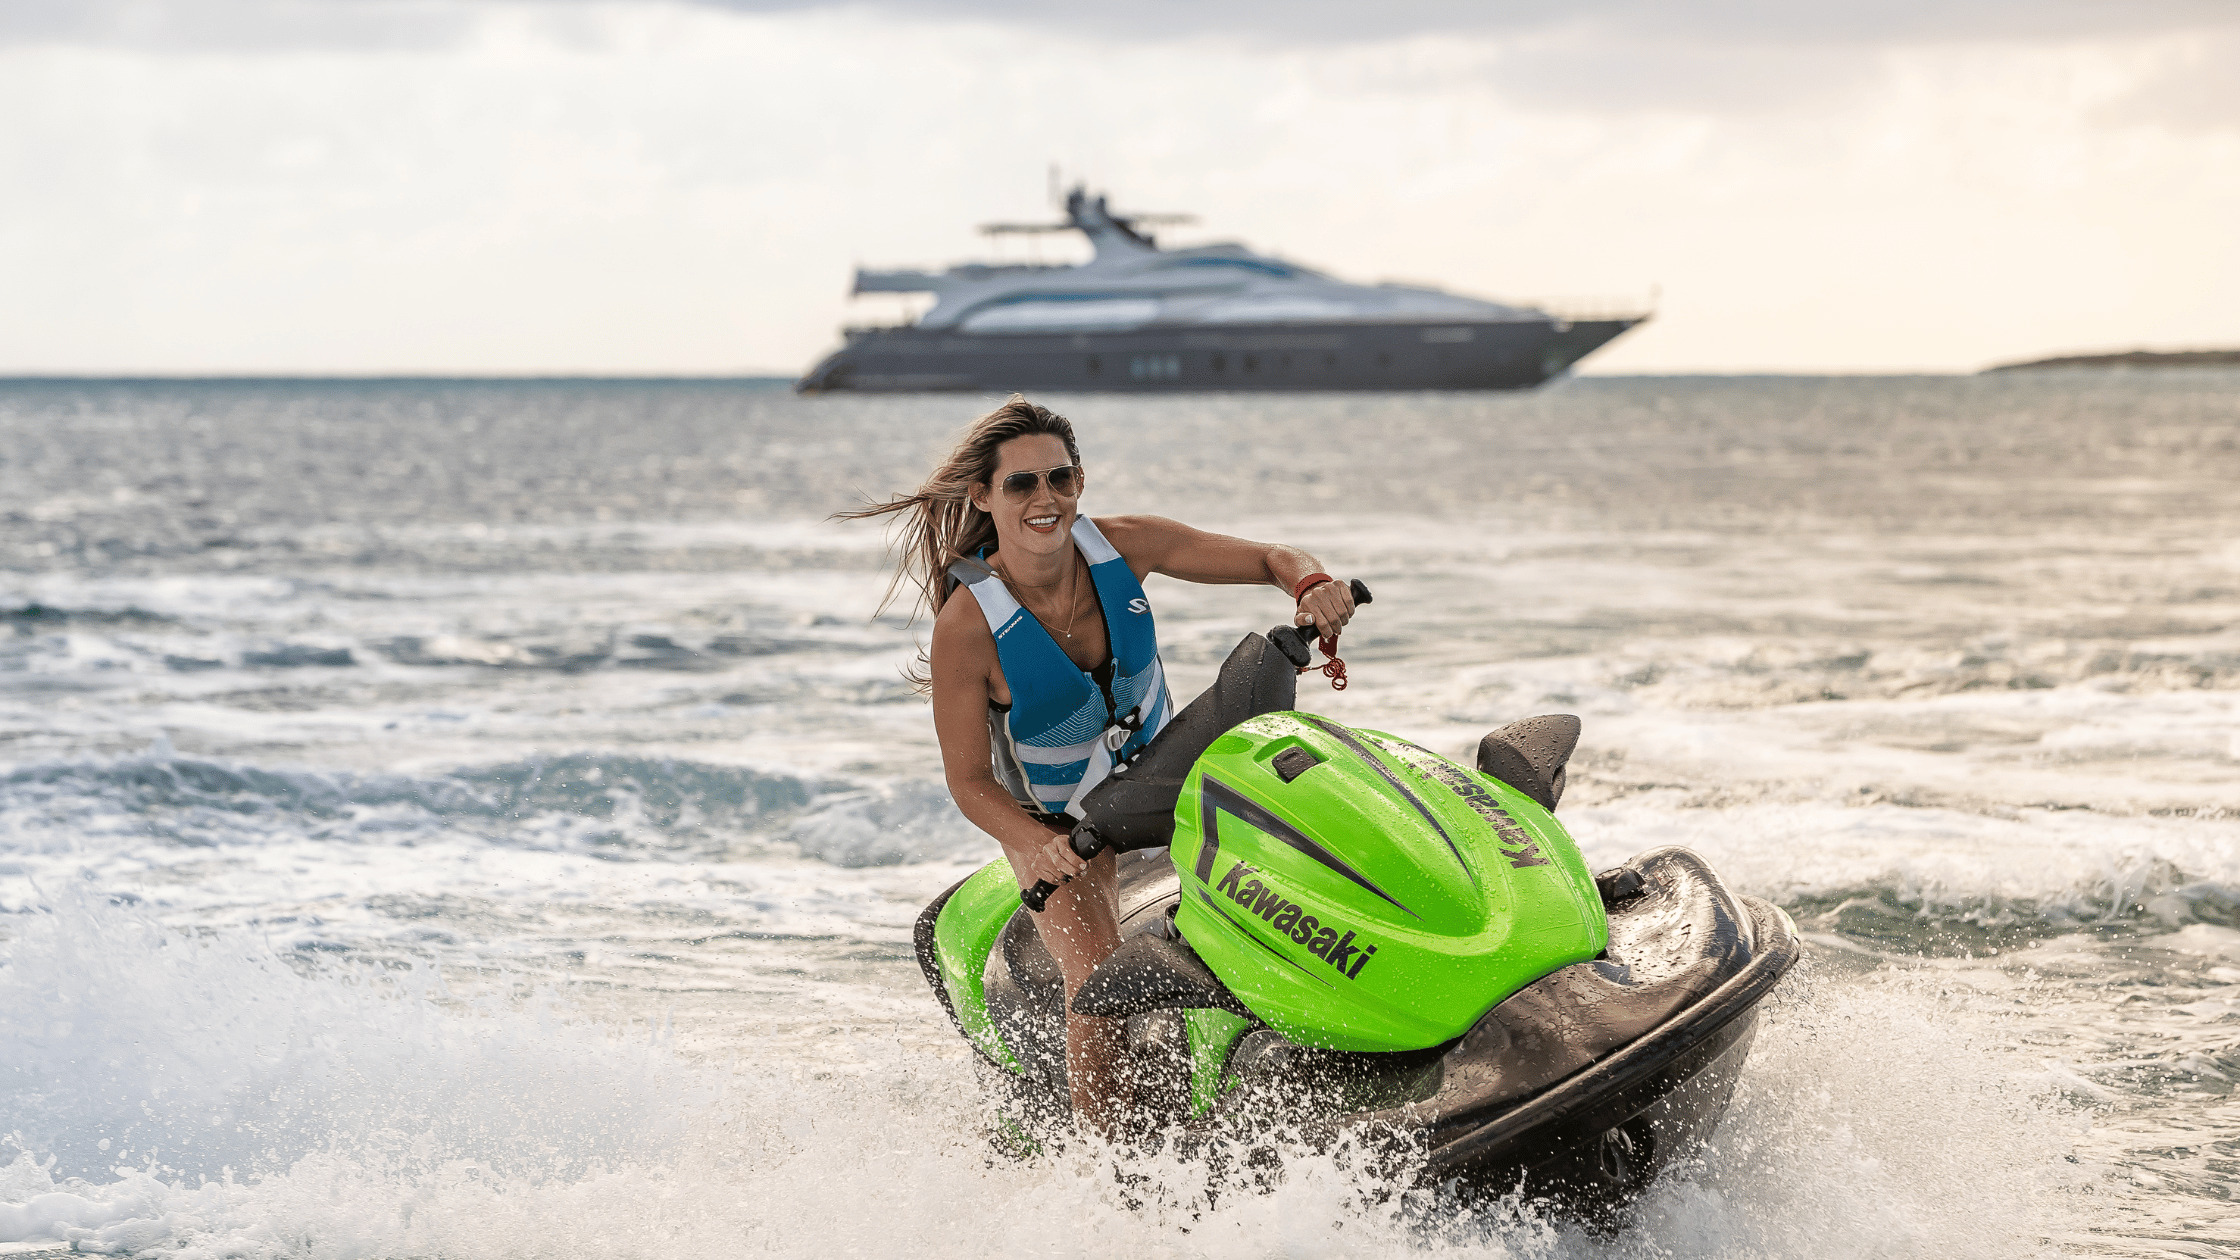 Jetski with yacht in the background on the water